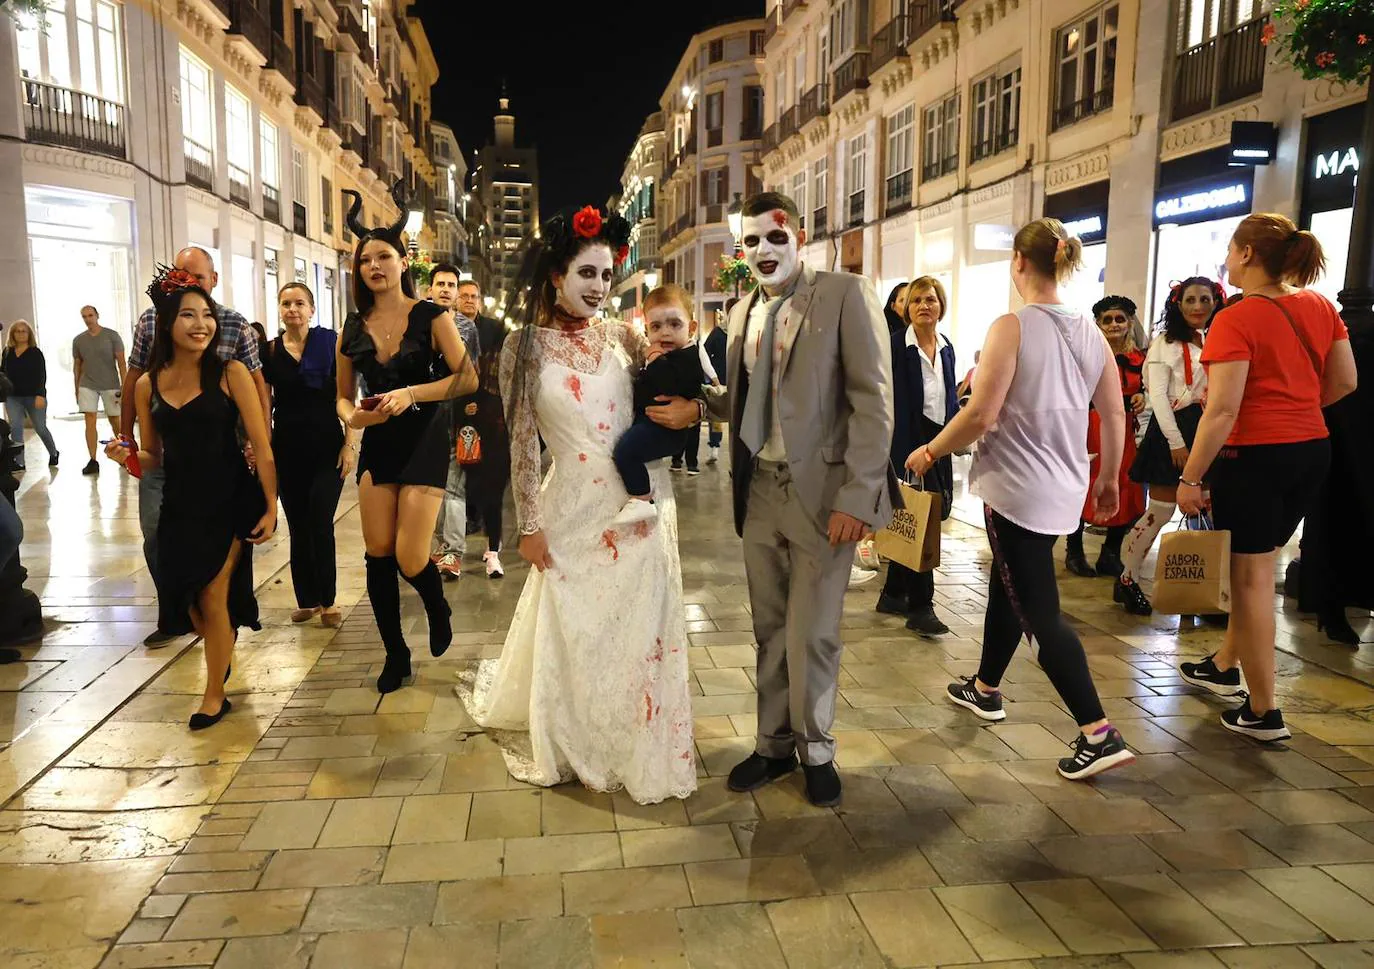 Halloween in the centre of Malaga. 